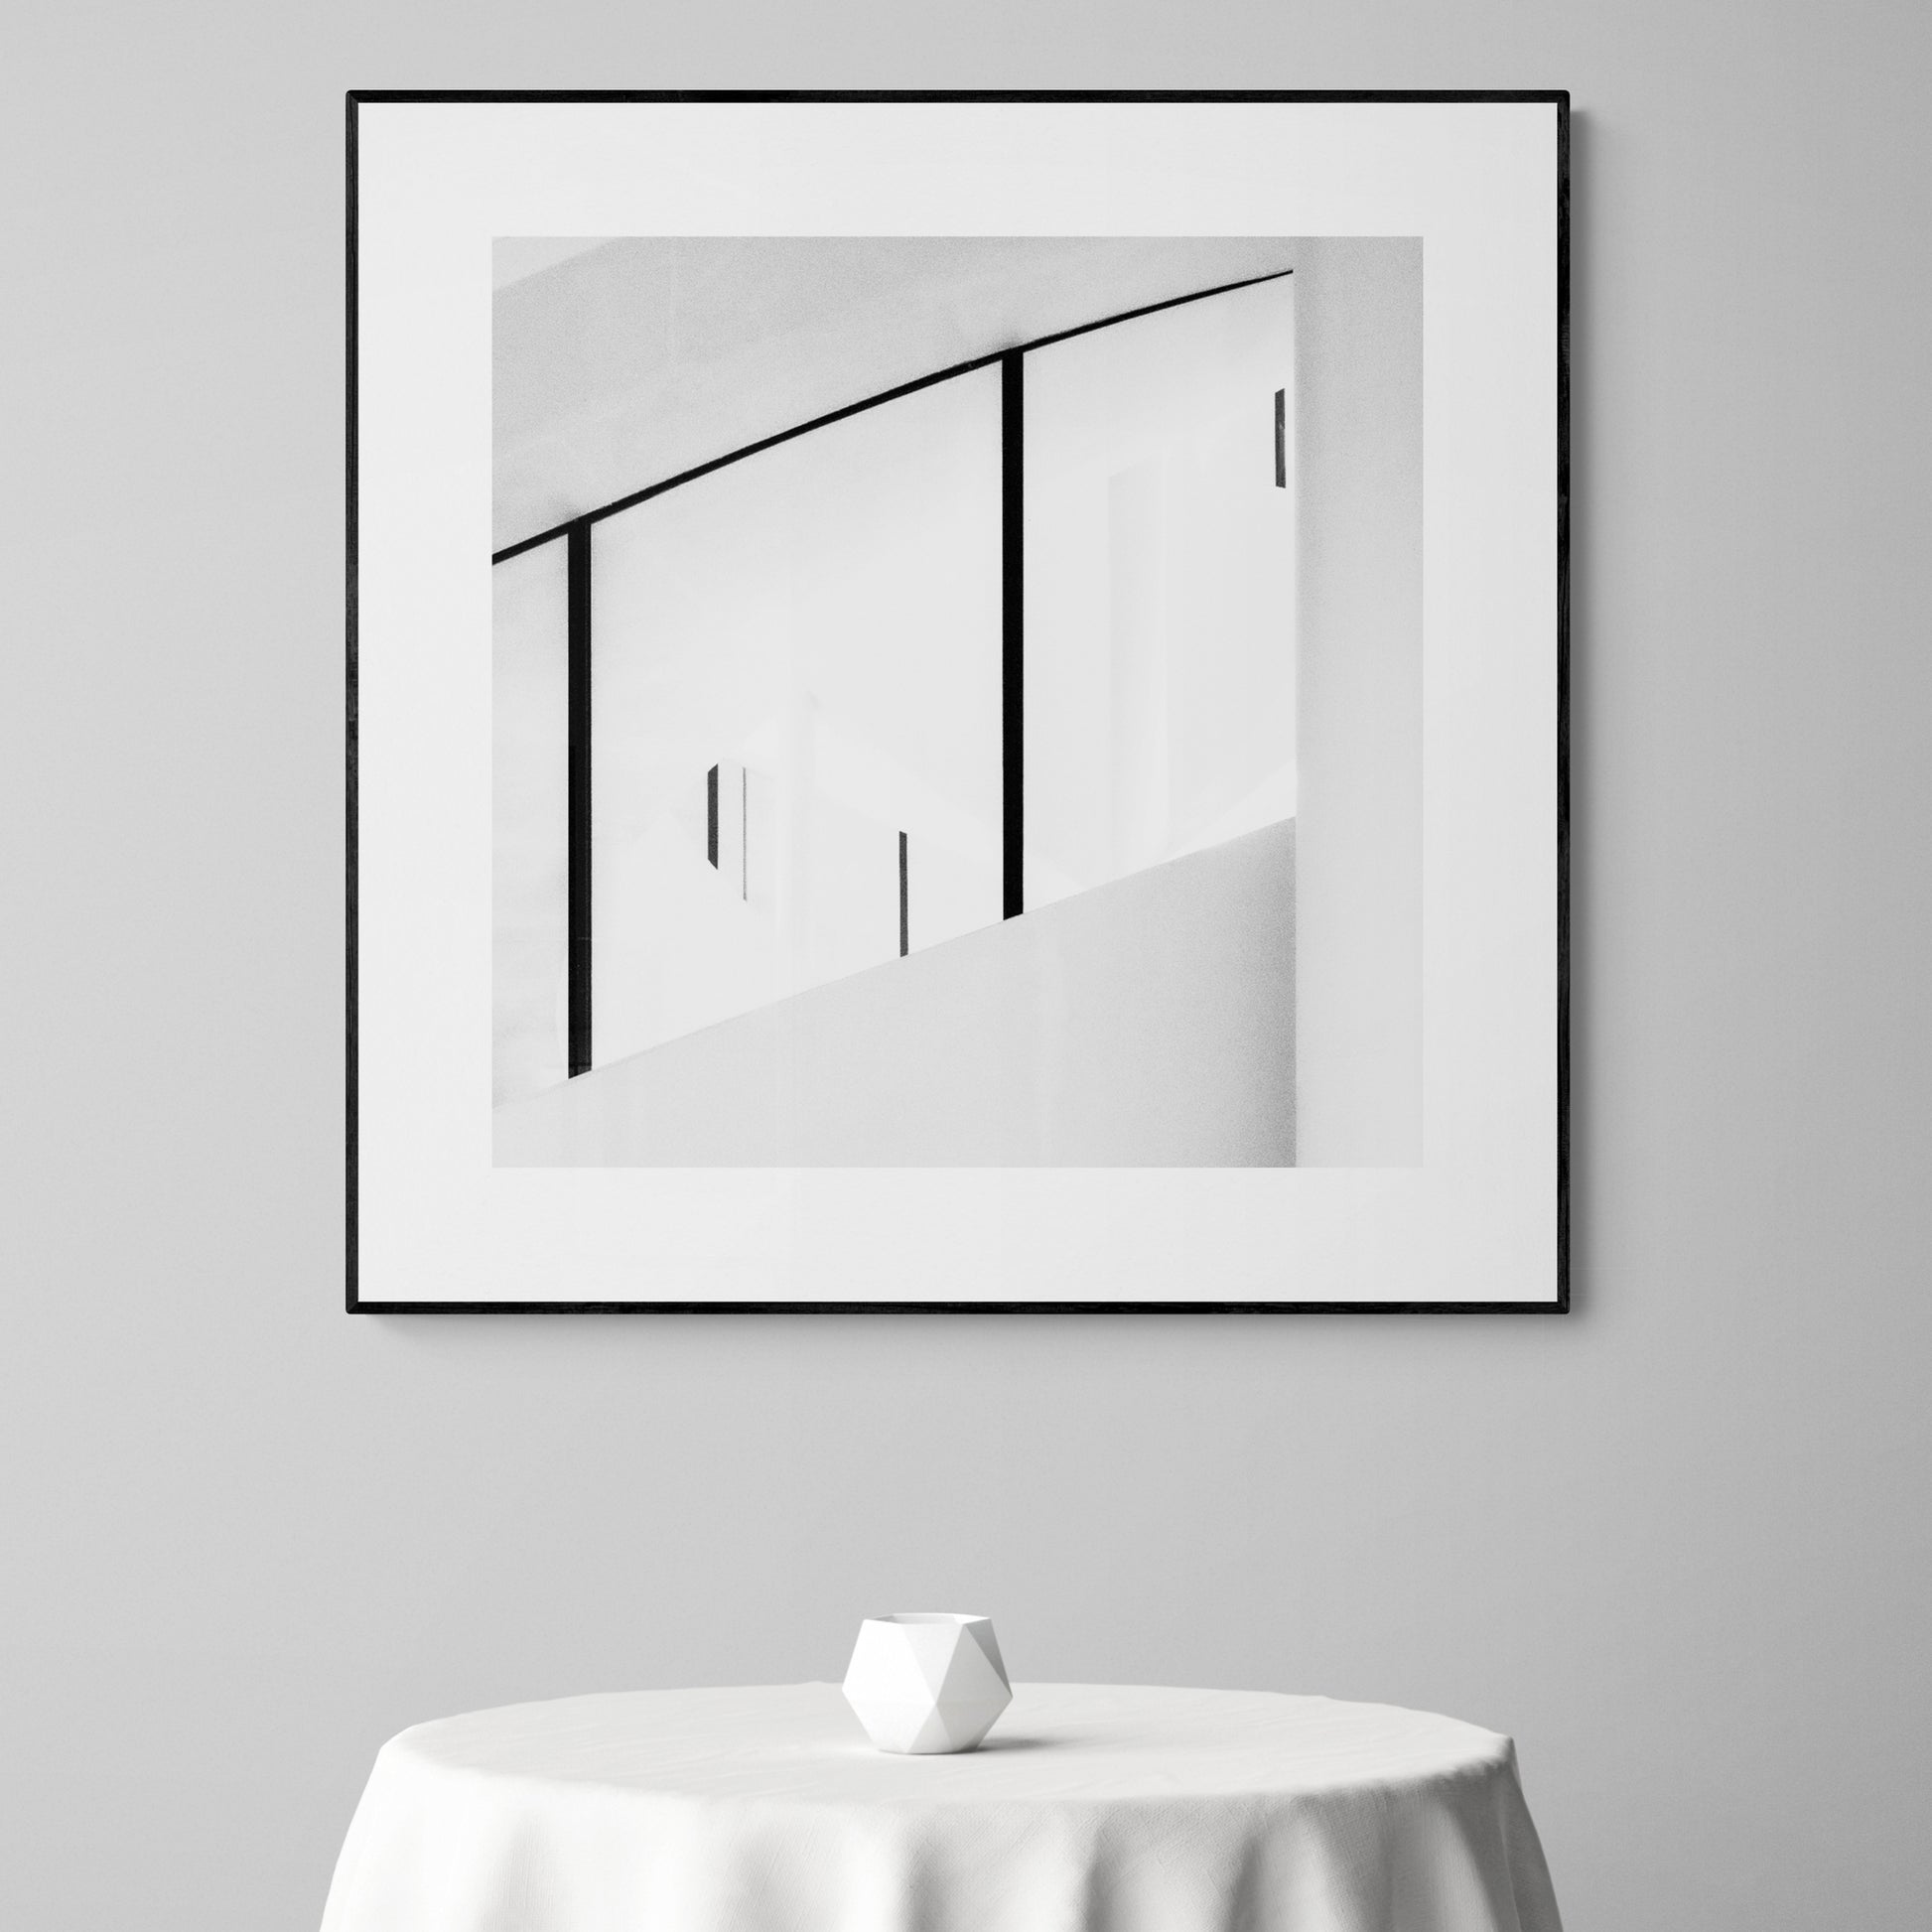 Luma Tower, Arles. Staircase. Minimal black and white photography. Abstract, fine art photographs + wall art. By Eric Schneider Photography